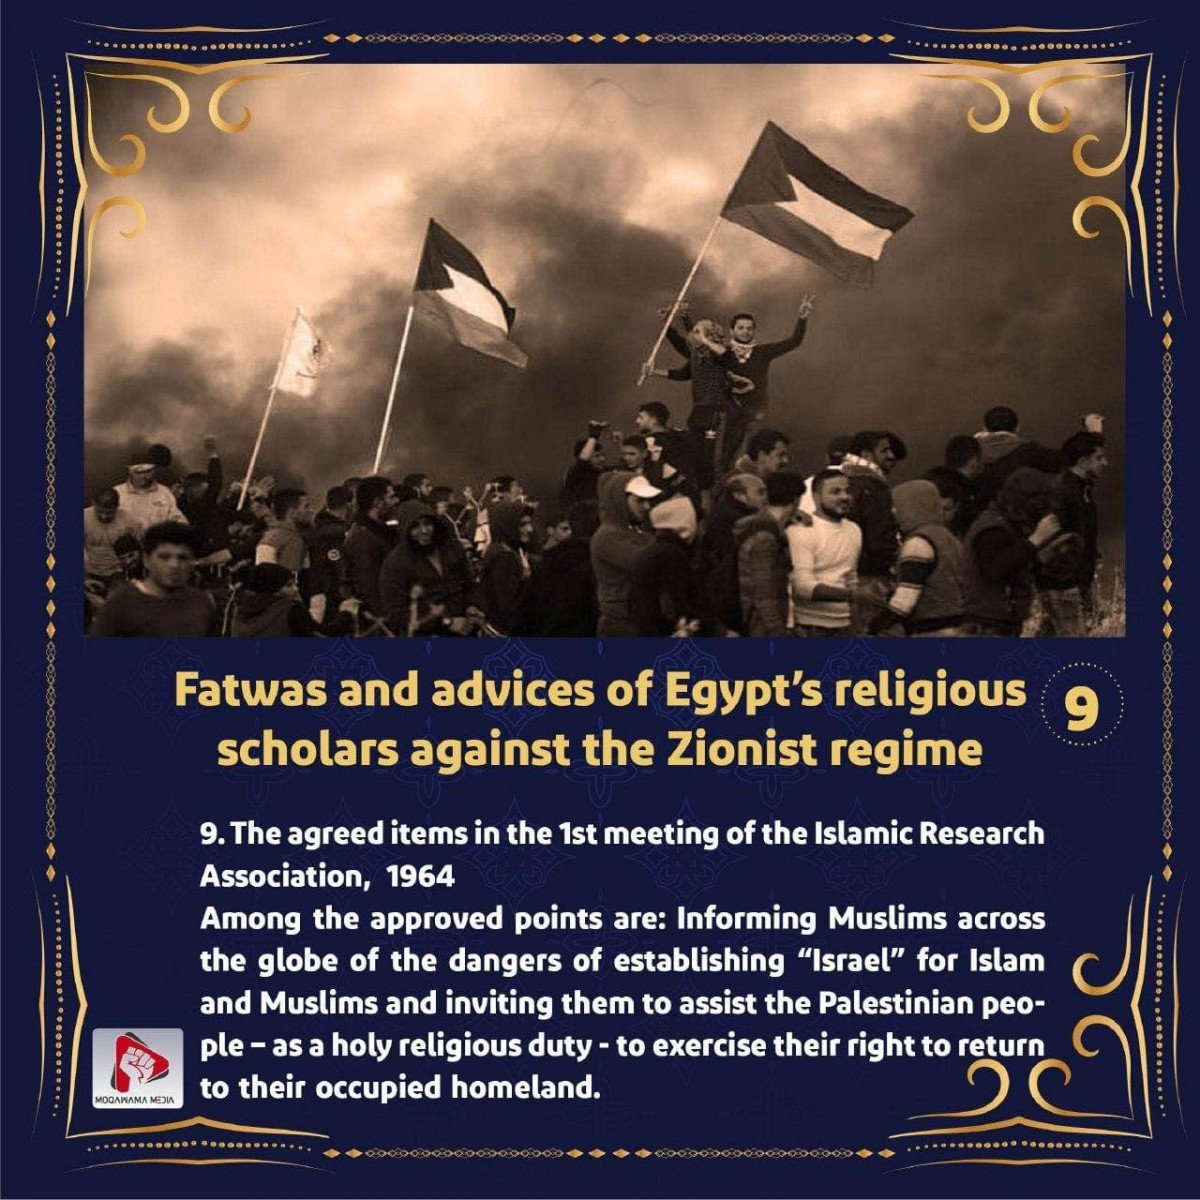 Fatwas and advices of Egypt's religious scholars against the Zionist regime 10